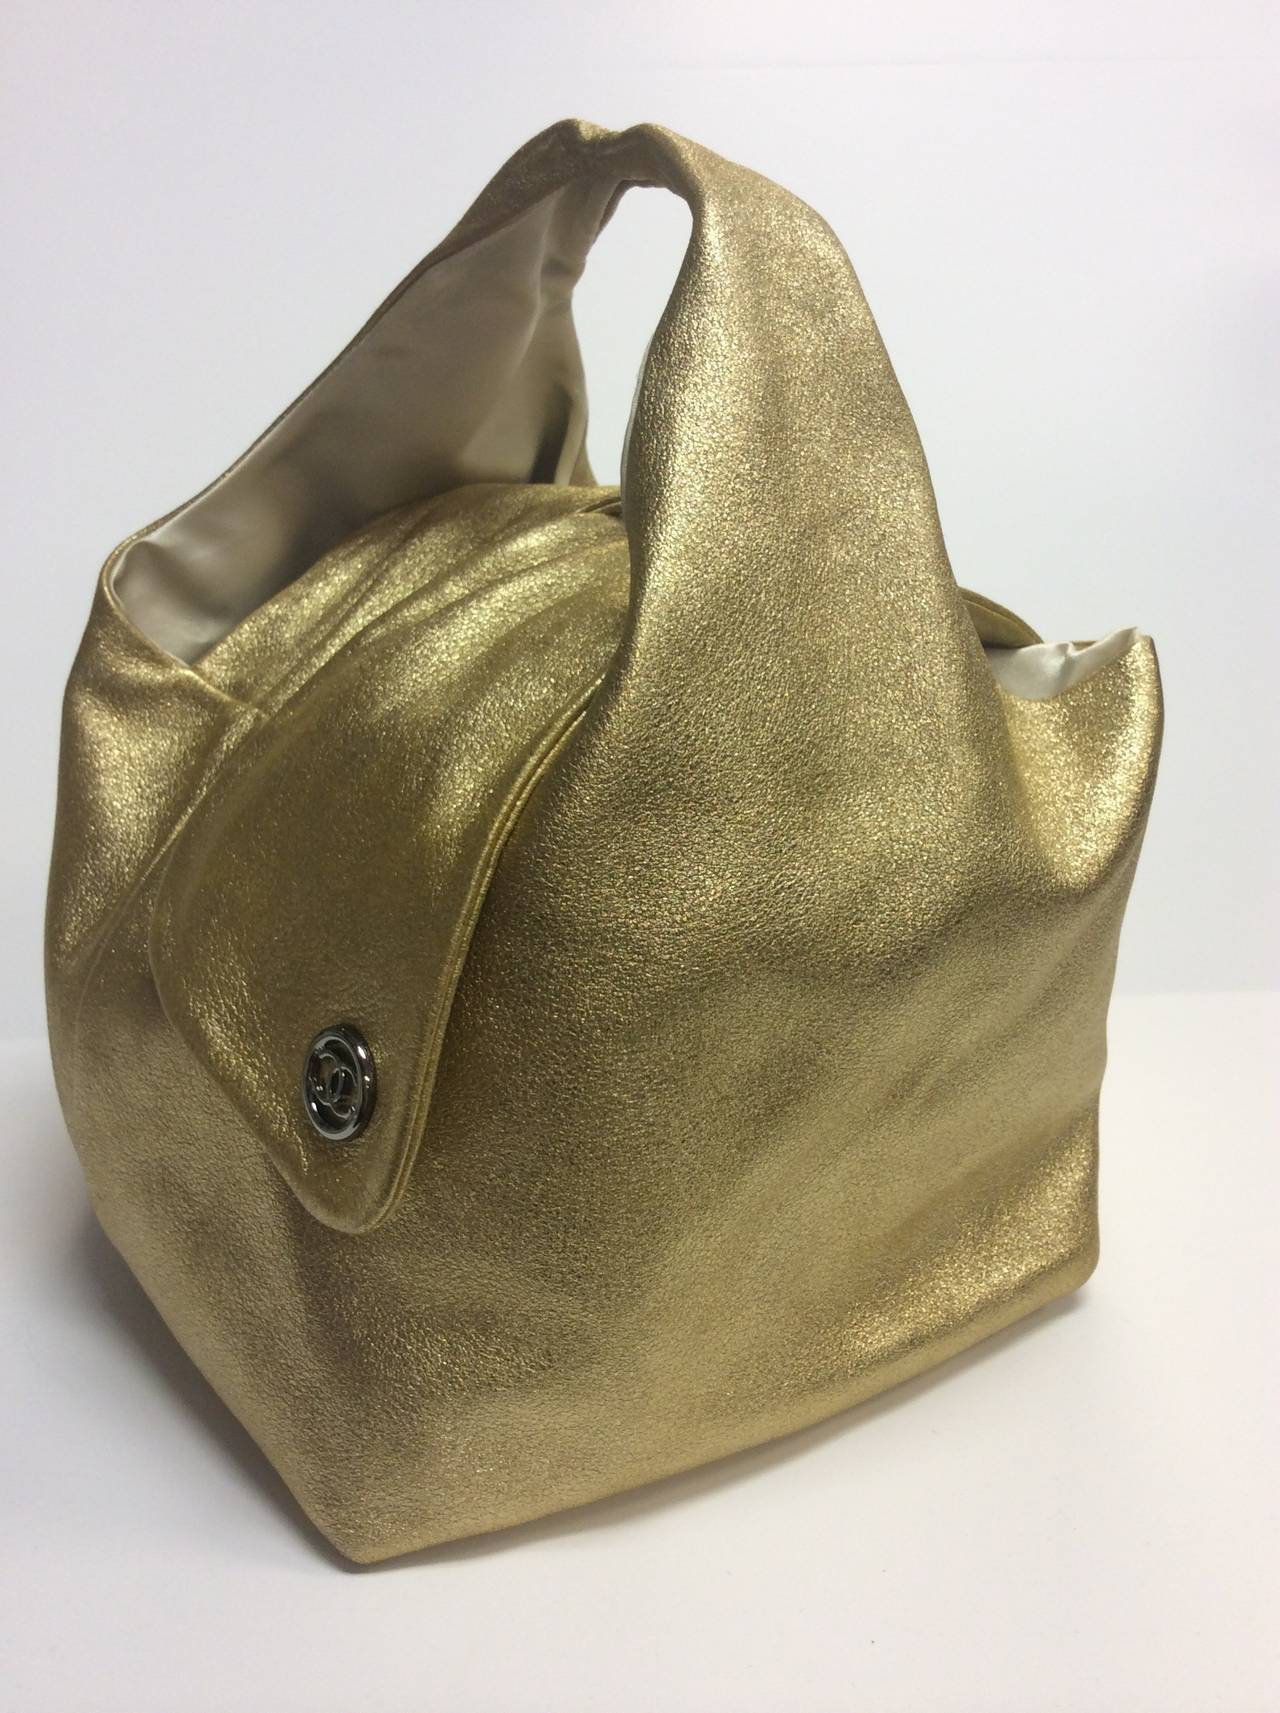 This is a lovely 2008 Chanel metallic gold soft Lambskin Erving hobo lined in silk. Pristine clean condition with Pluto ear flaps closure.
This is a collectible sweet token of love.